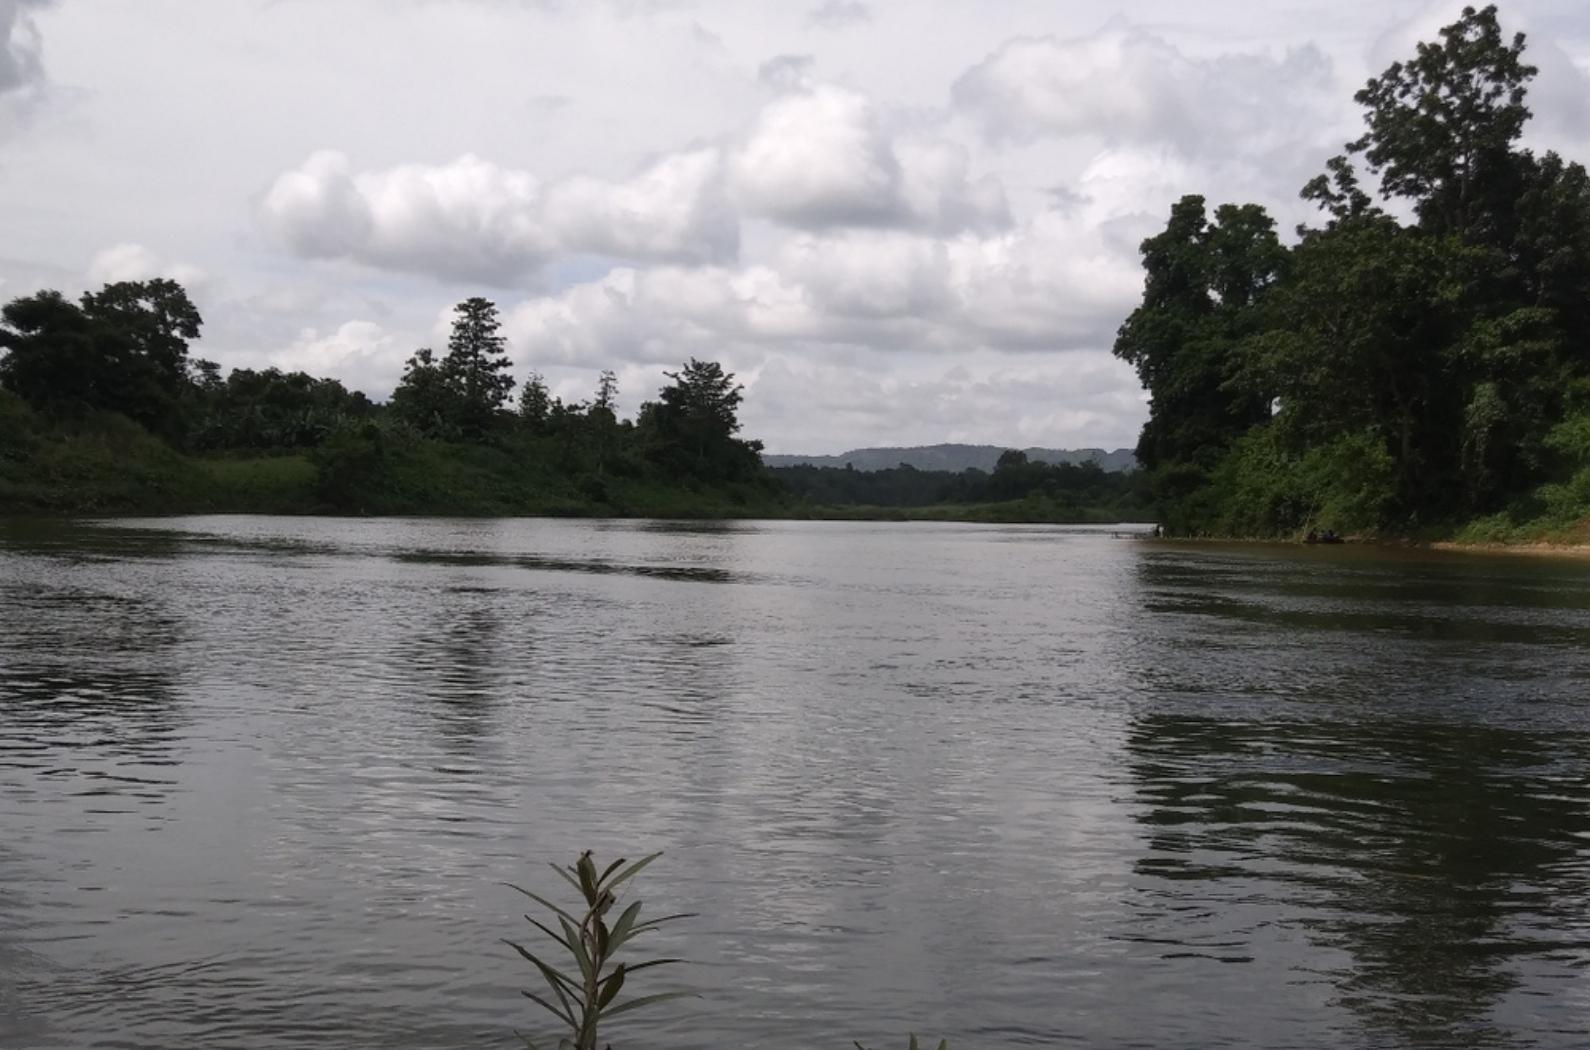 This is a picture of Simsang River, this place is called Mrik Wari. This place is located in Meghalaya, India. It is a great place for outdoor activity, and fishing and boating.